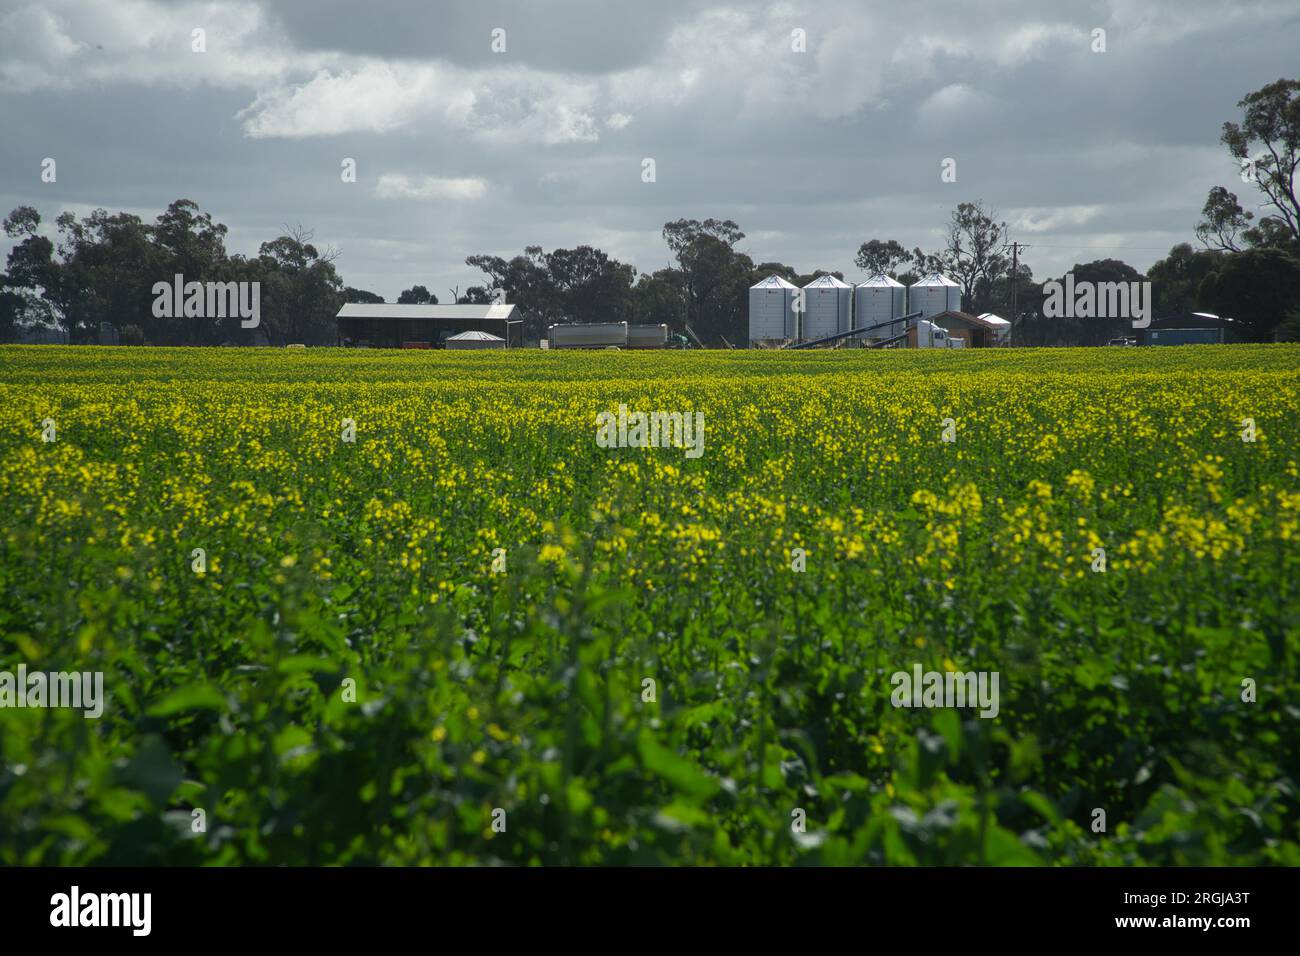 Cooma Victoria Australia, 10 April 2023, A field of Yellow Canola, A field of Canola (Rape Seed) in flower looking towards a rural farm house and silos.Credit PjHickox/ Alamy LIve News Stock Photo